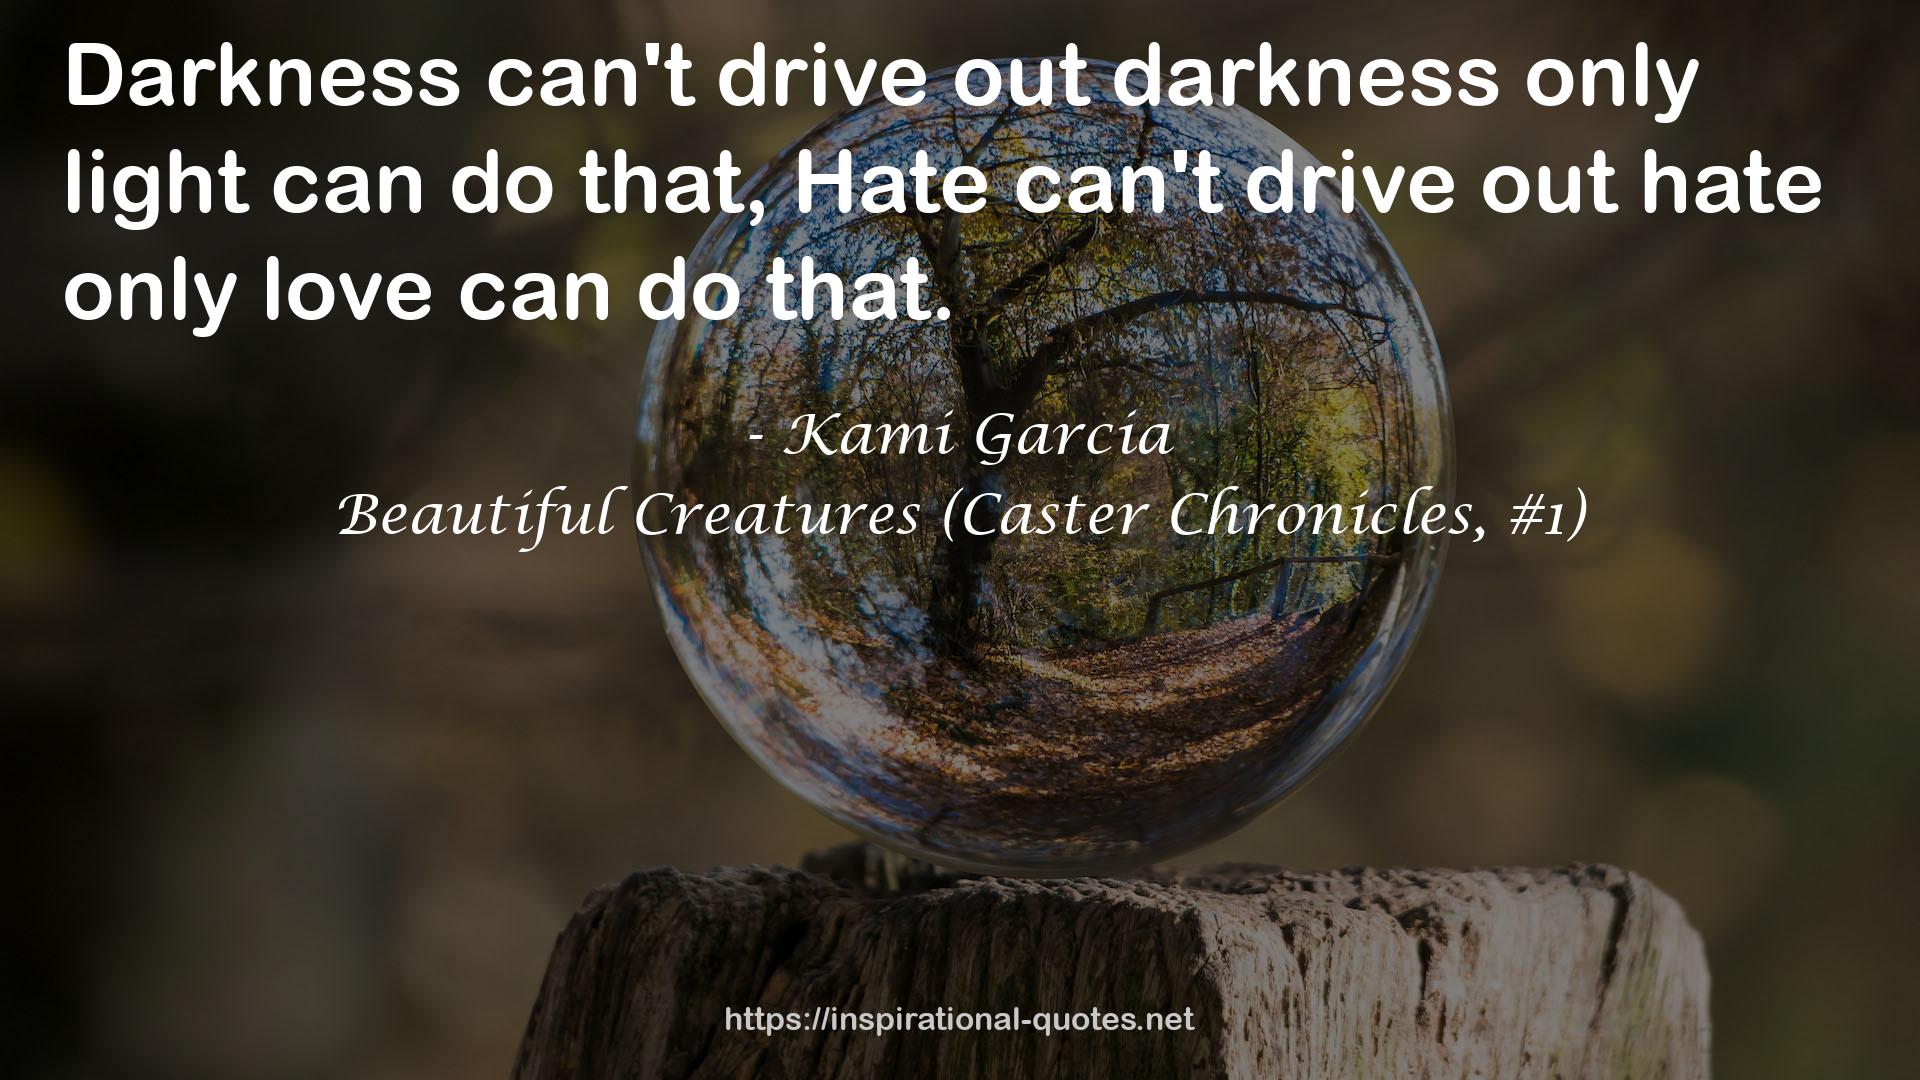 Beautiful Creatures (Caster Chronicles, #1) QUOTES